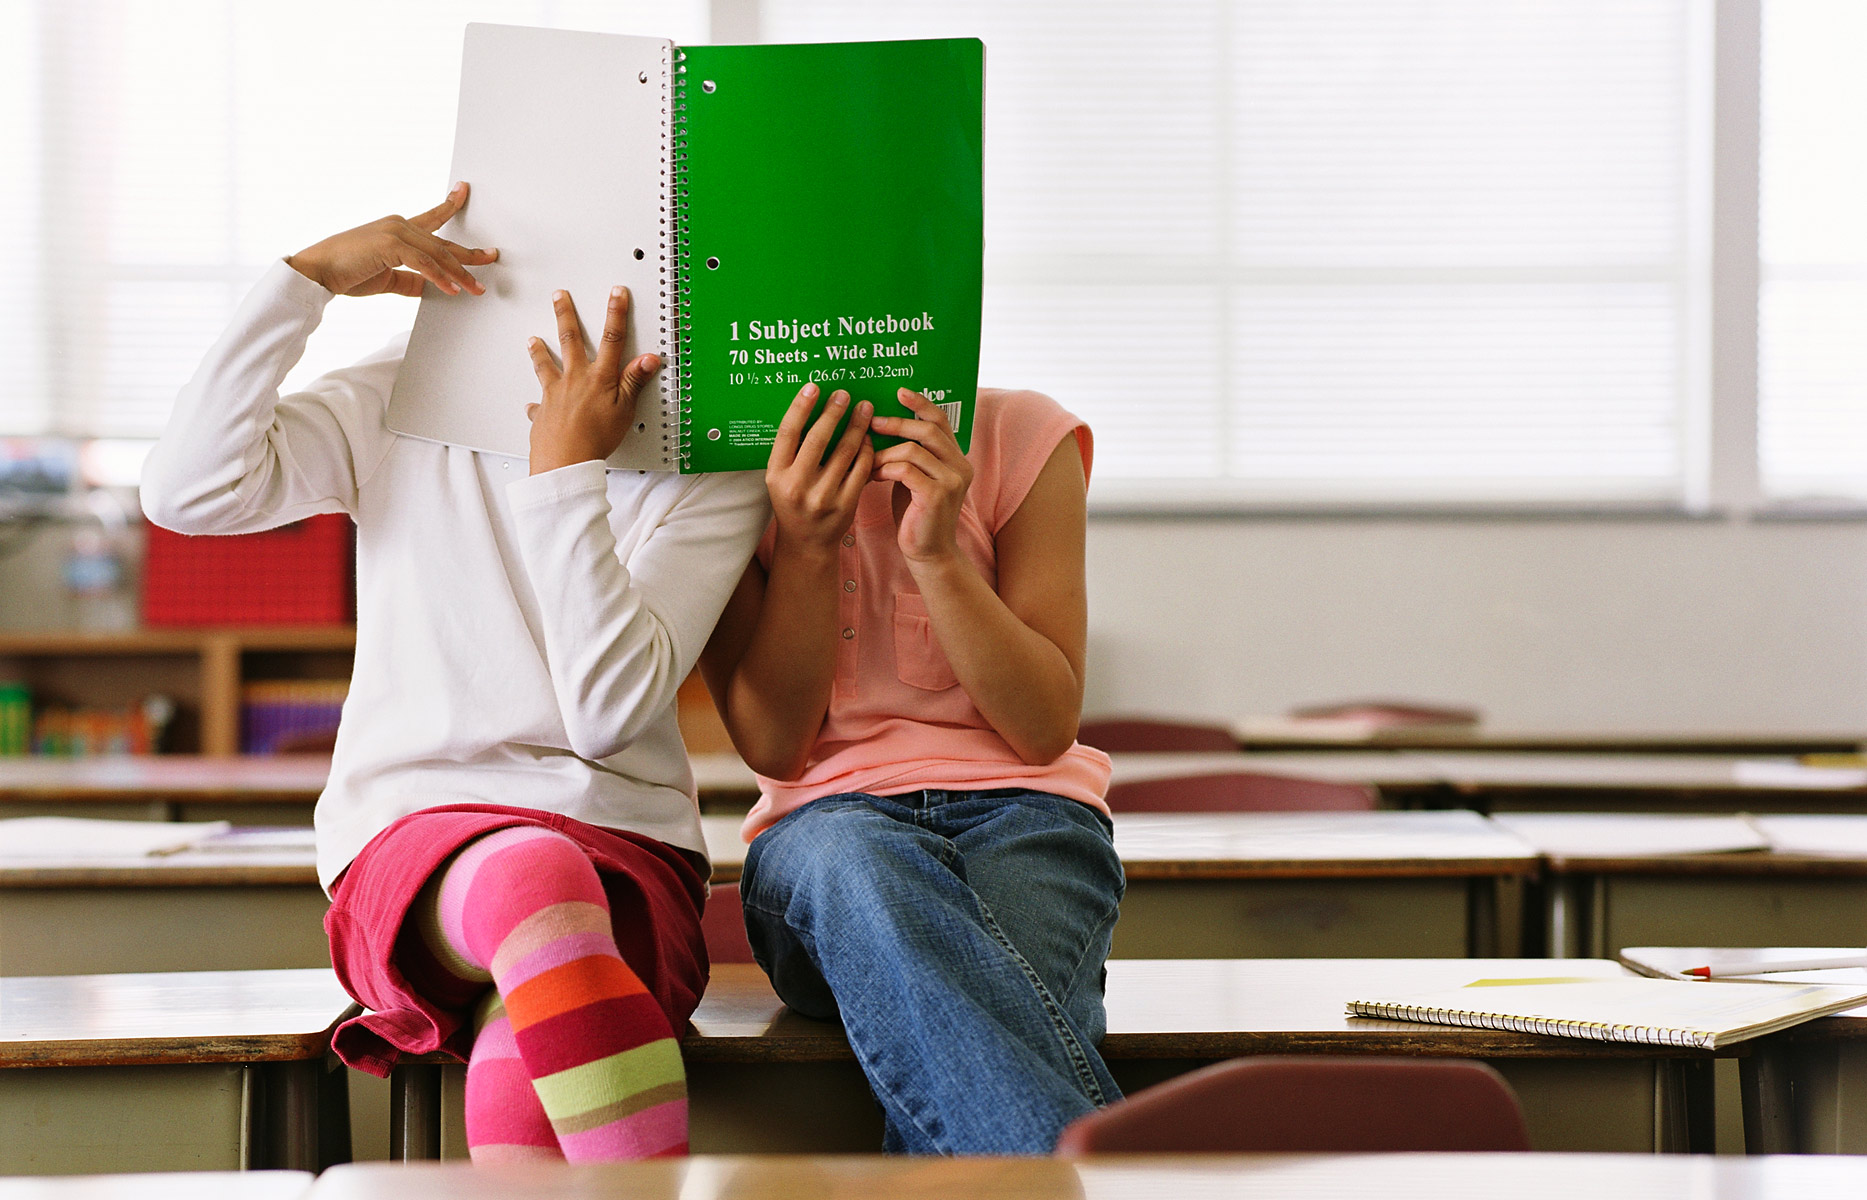 girls_in_classroom_with_green_notebook_over_their_faces-book_end_girls-spread